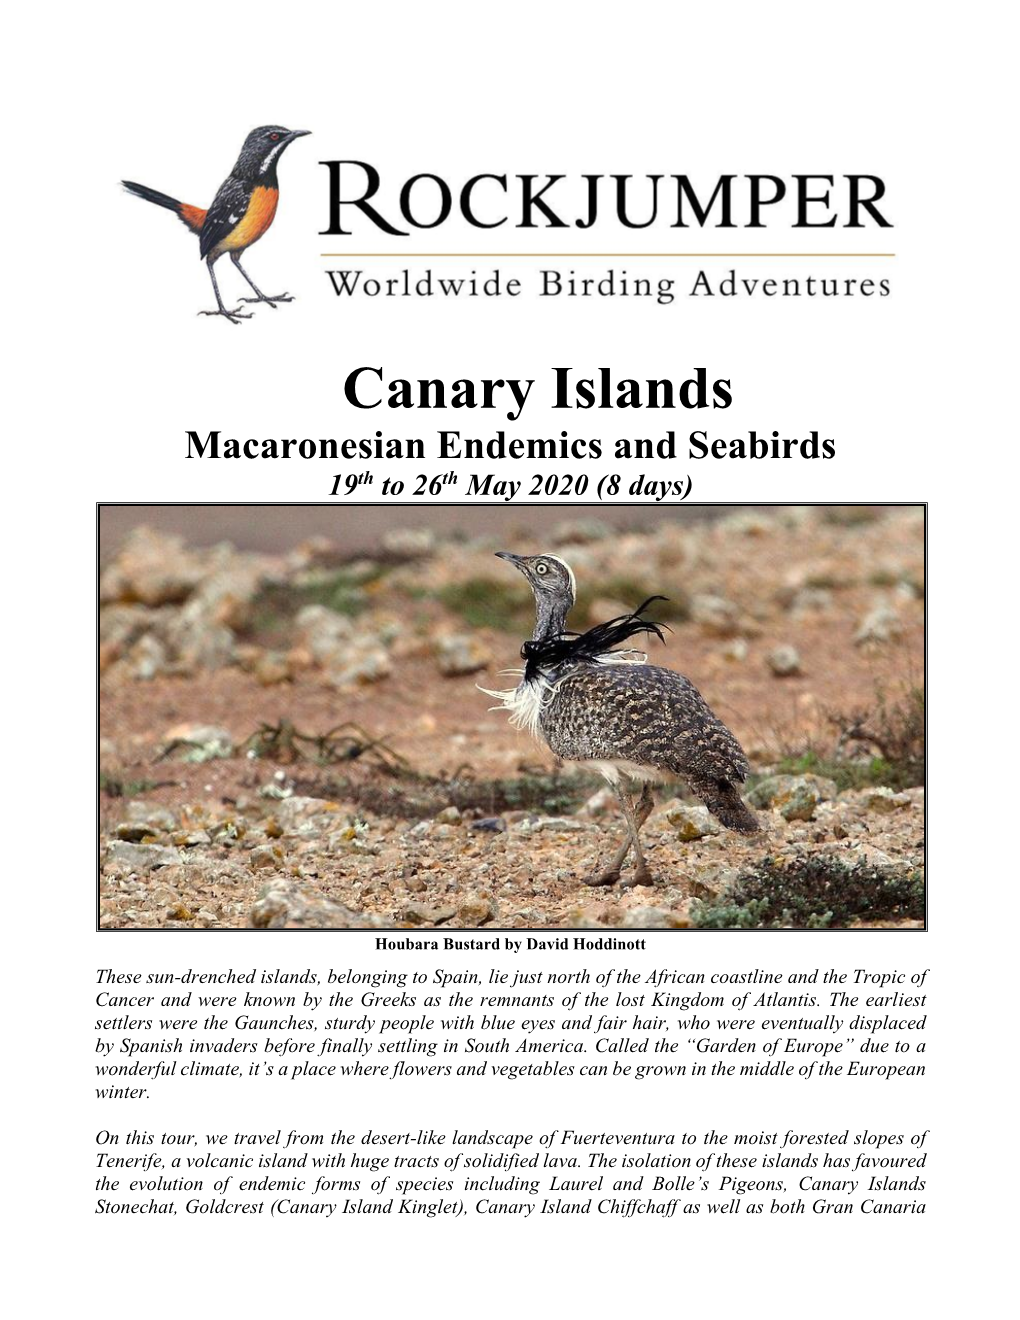 Canary Islands Macaronesian Endemics and Seabirds 19Th to 26Th May 2020 (8 Days)